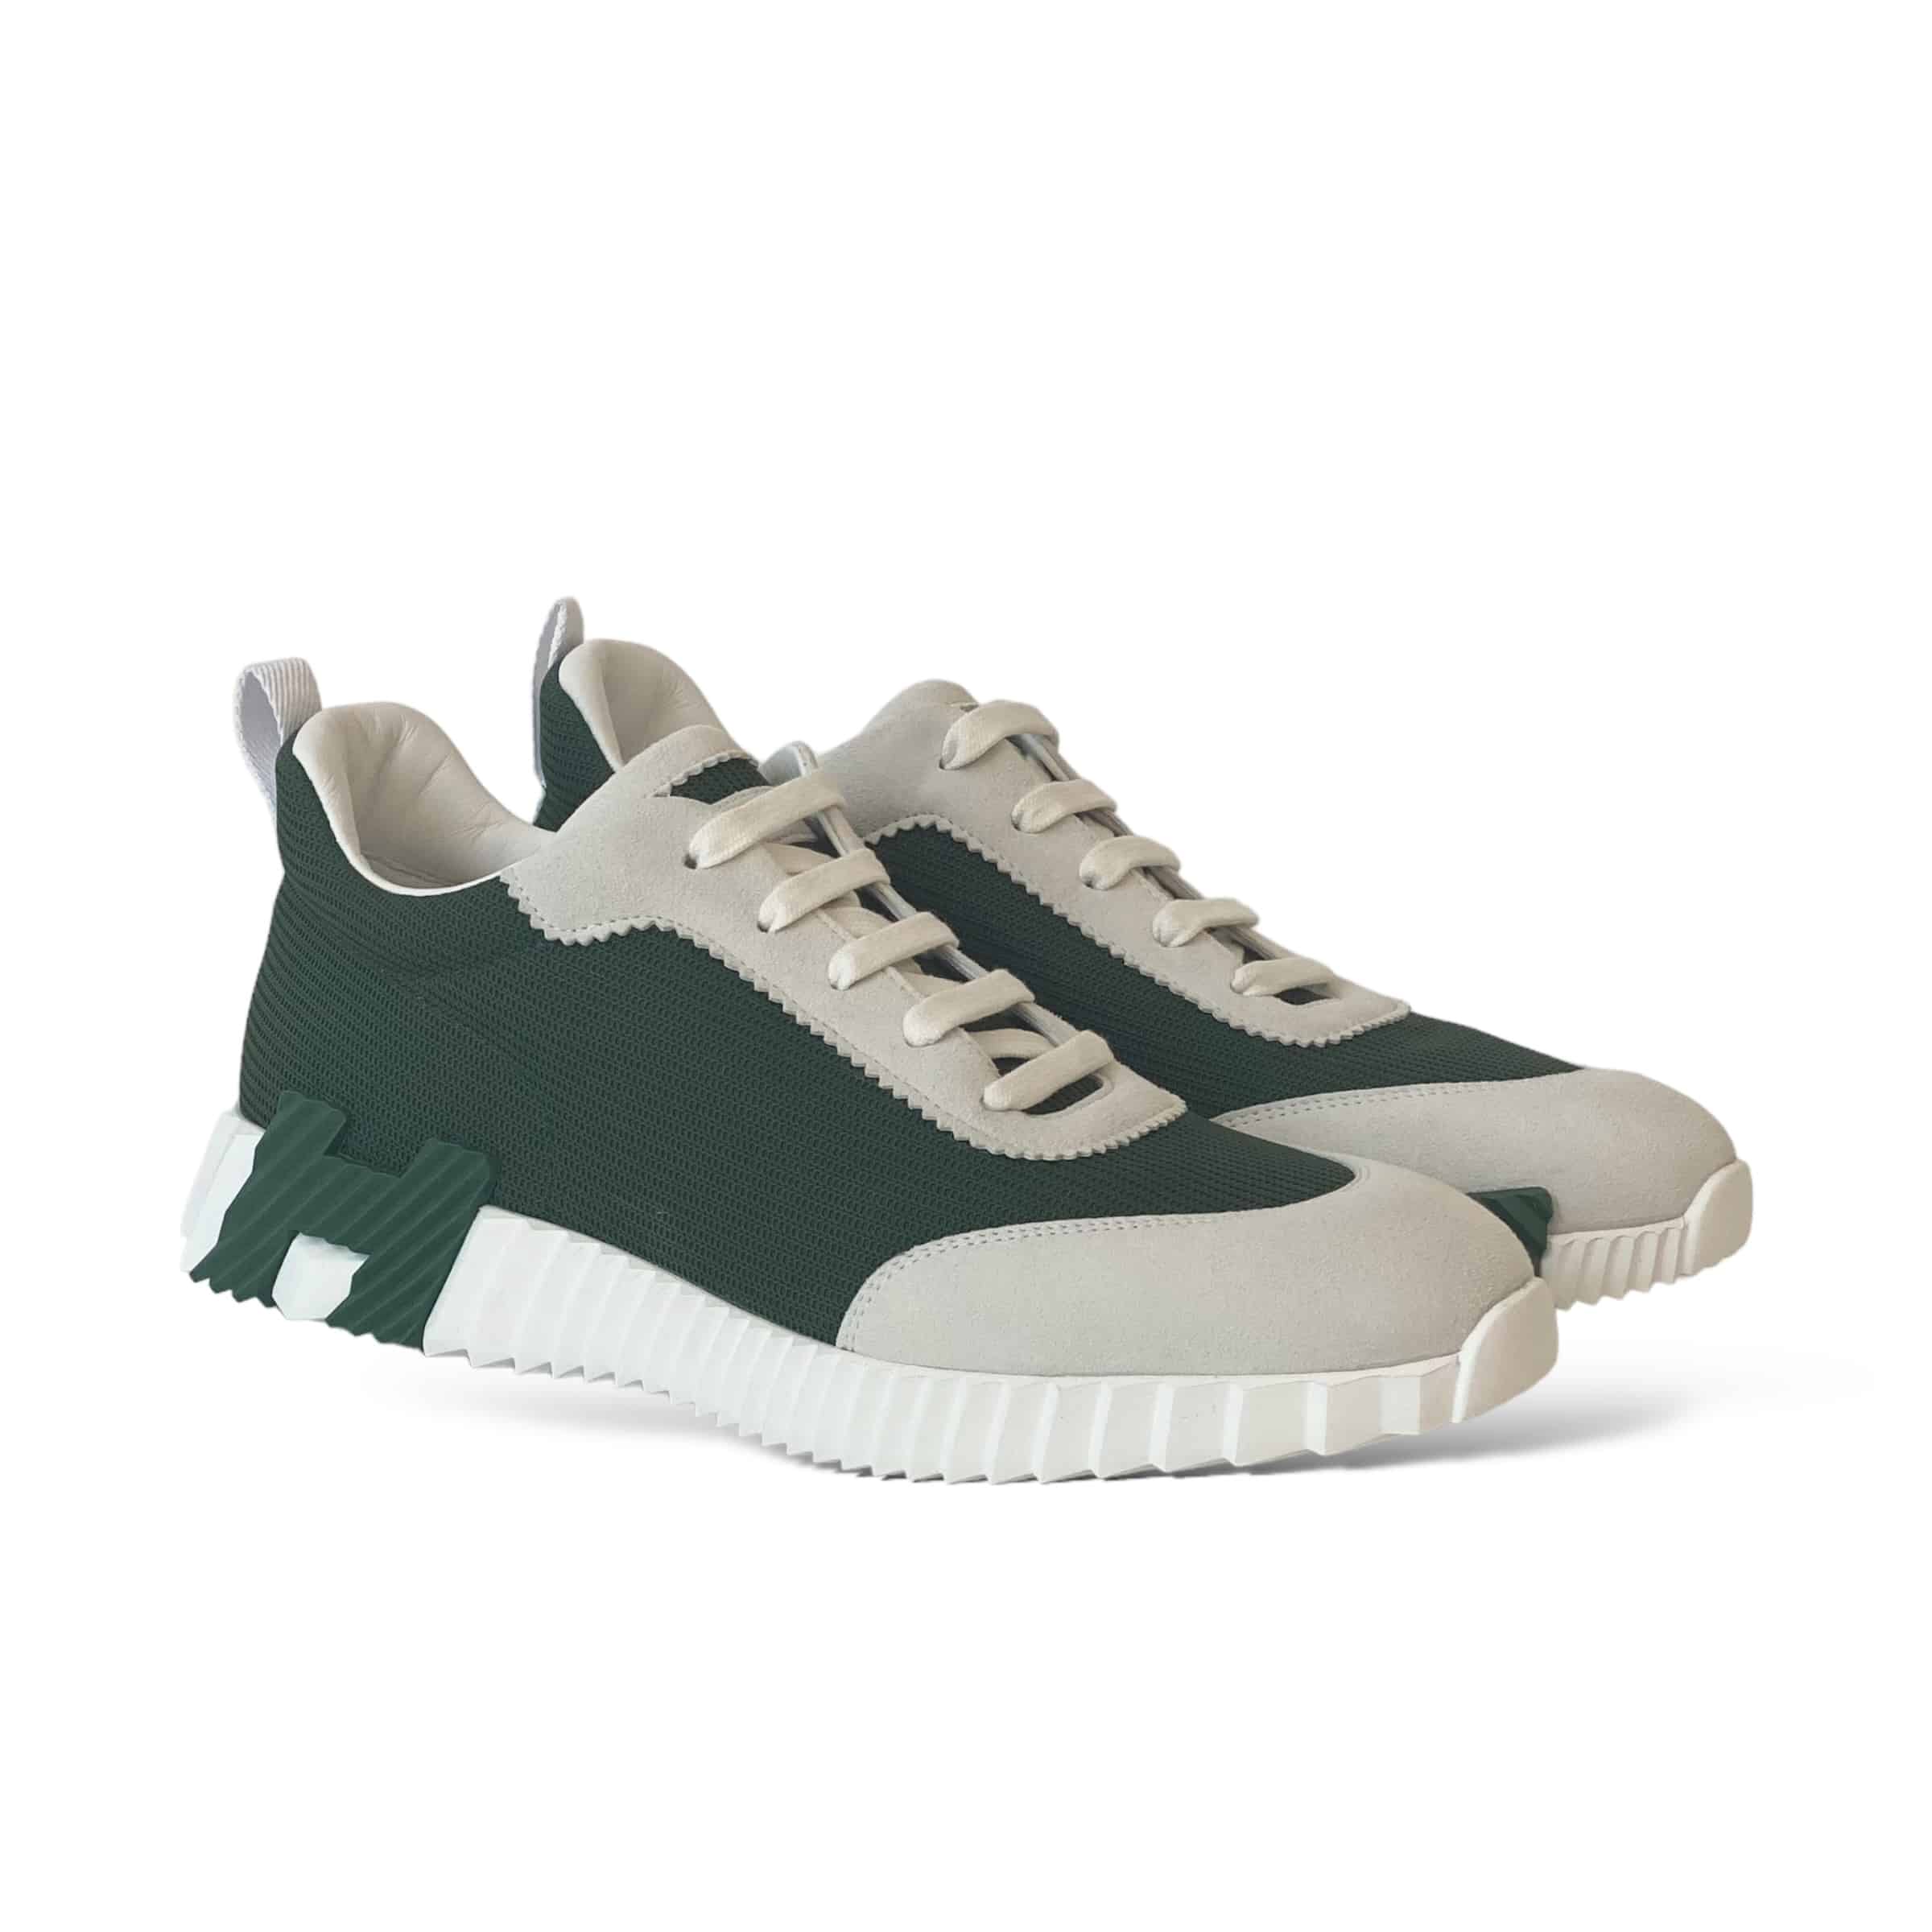 Hermes Bouncing Size 42 EU Sneakers Vert Cactus and White | The Luxury ...